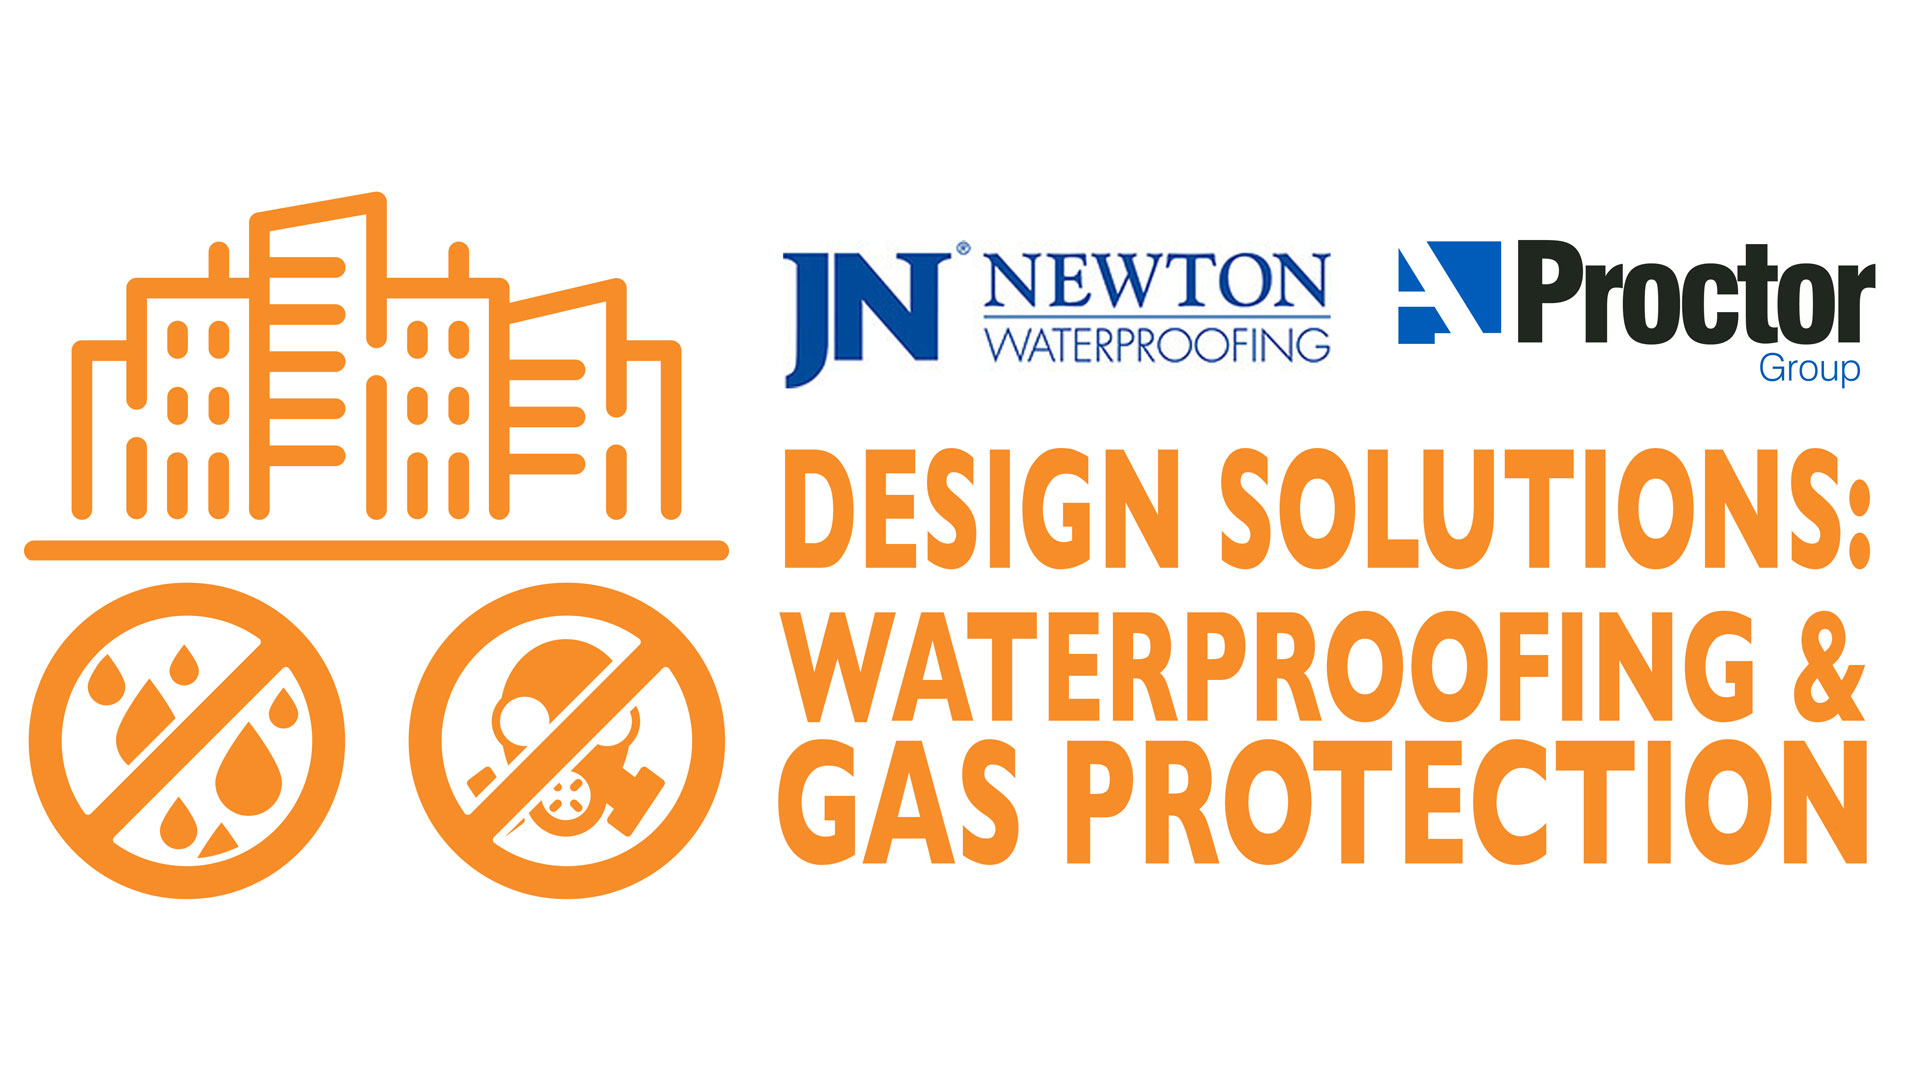 Welcome to our webinar, "Design Solutions: Waterproofing & Gas Protection". Combined waterproofing with ground gas protection has been a hot topic of conversation for the last few years. Has the update to British Standard 8102:2022 better aligned the waterproofing standard with gas protection best practice? And has it removed the confusion that can occur when trying to keep both water and ground gases out of a building?